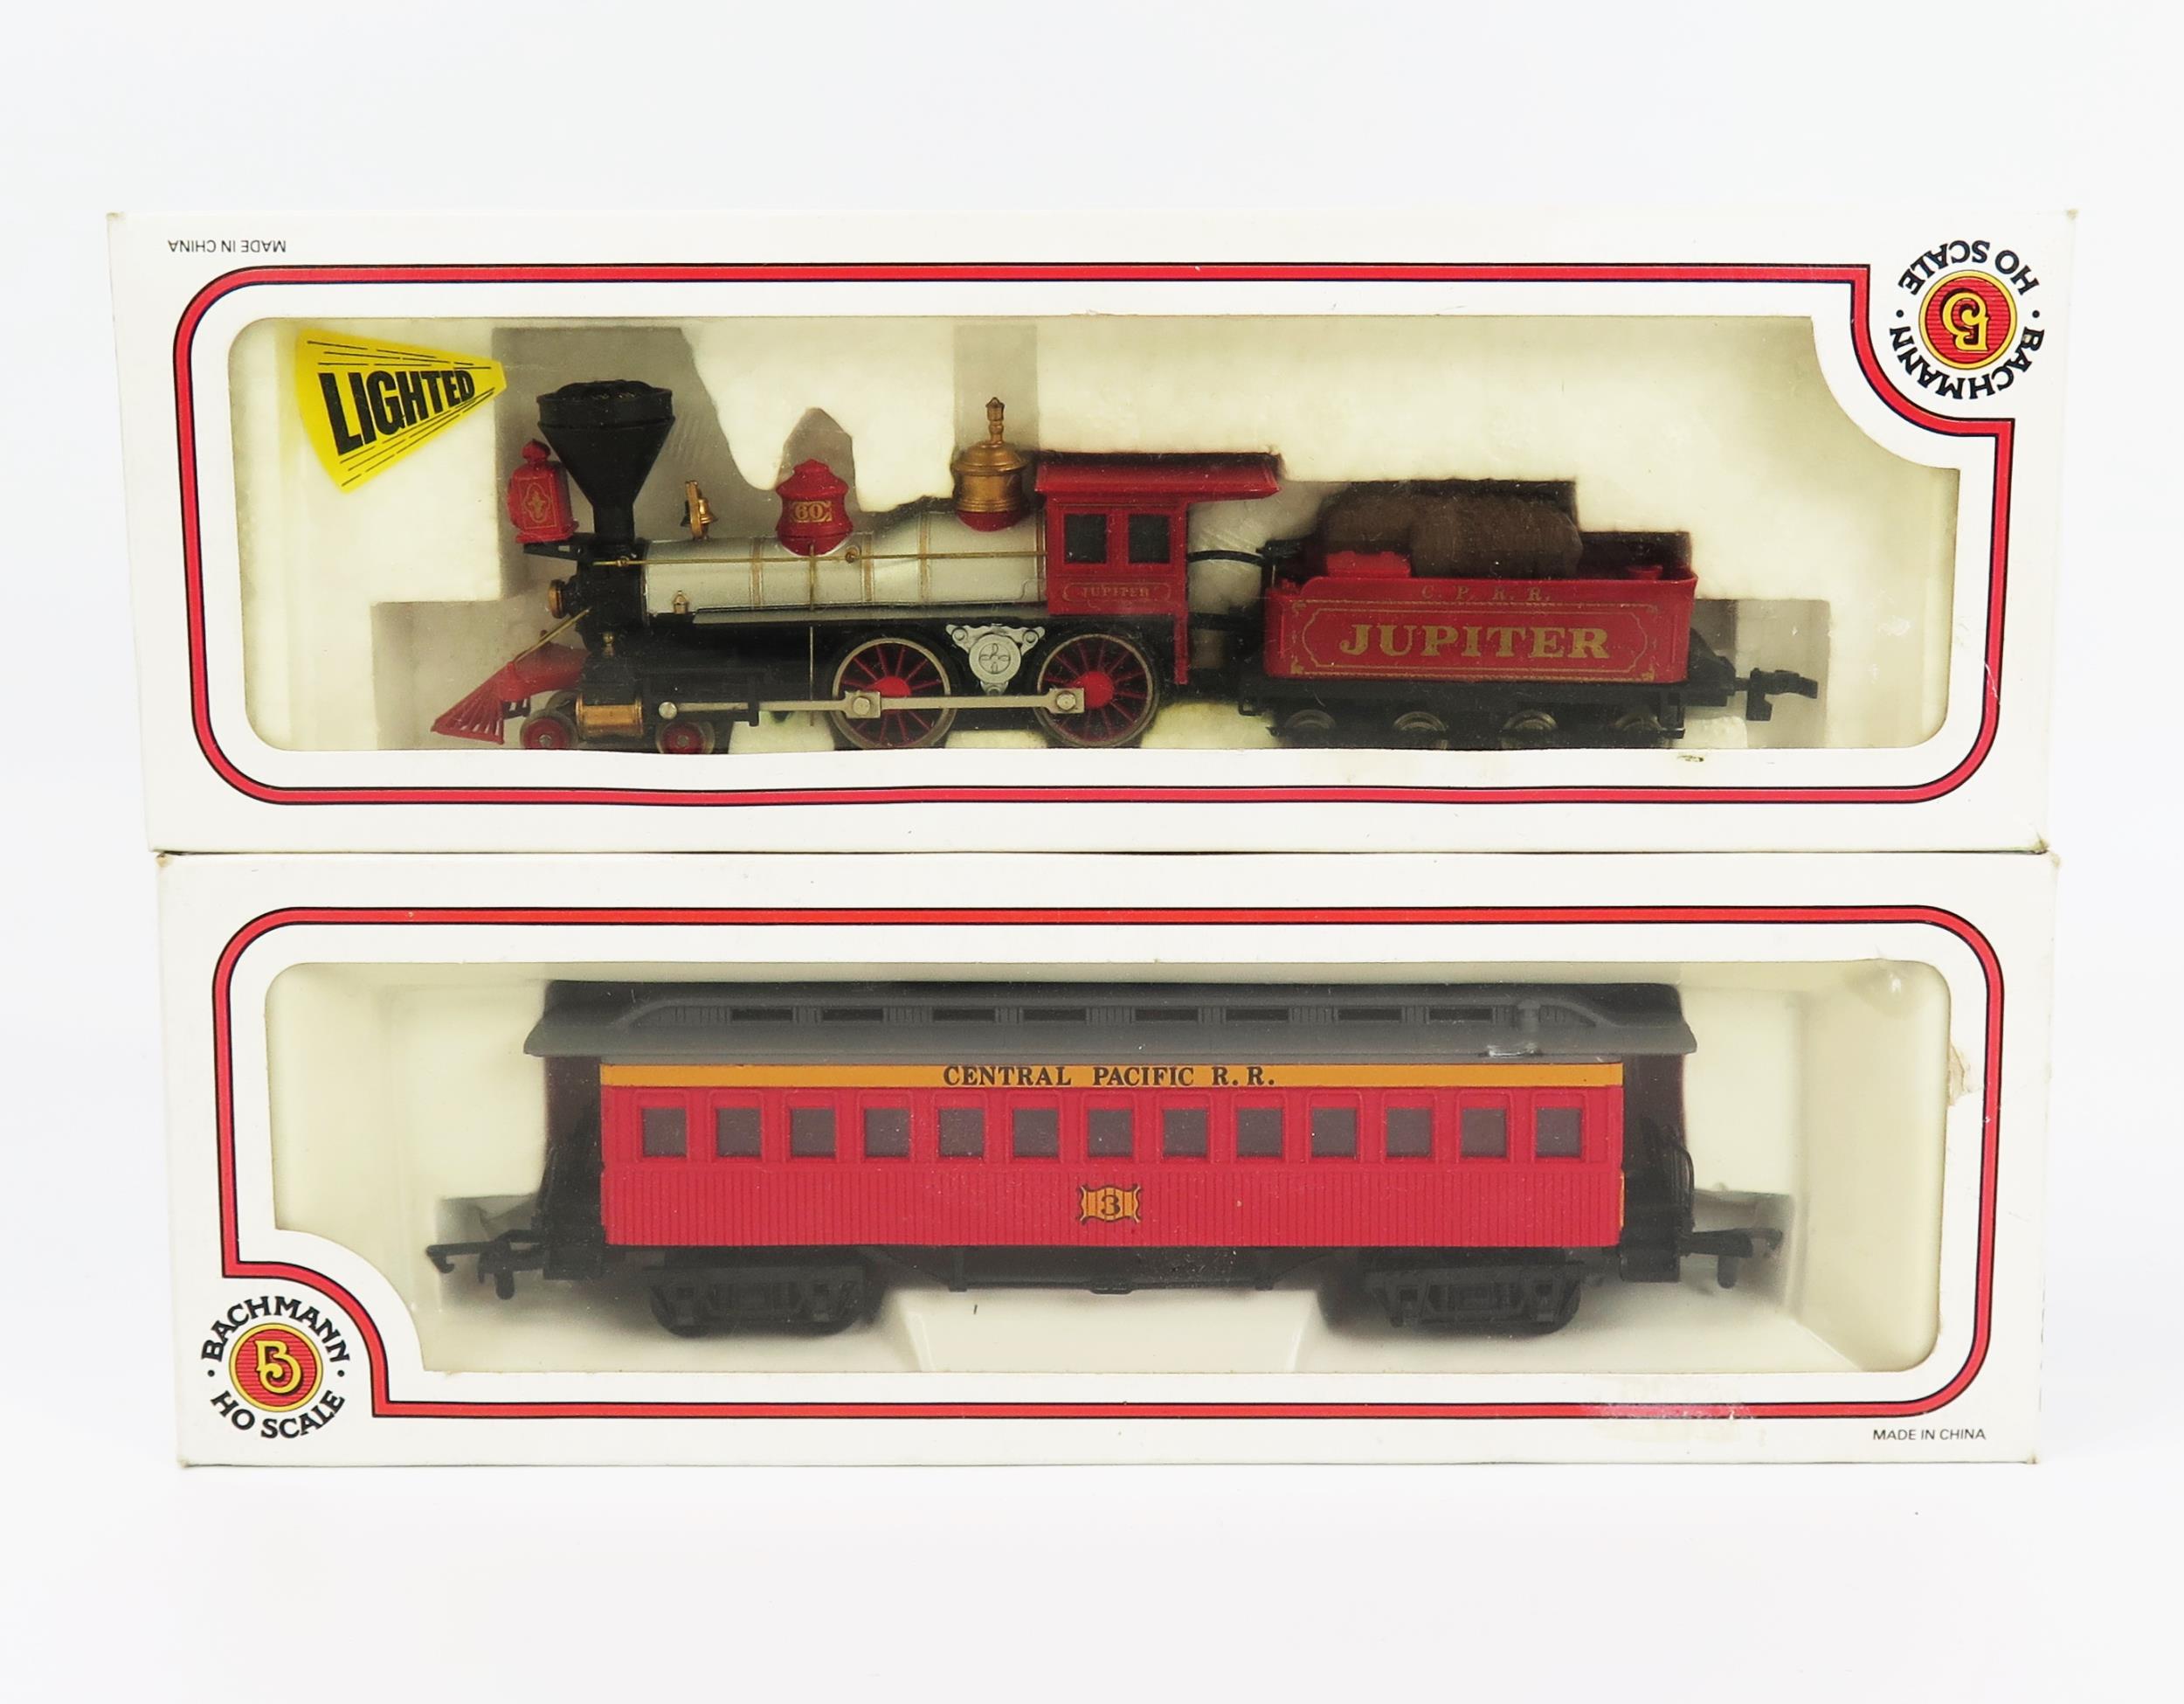 Bachmann HO / OO Gauge 51024 Central Pacific American 4-4-0 Loco (lighted) and matching 72924 47'